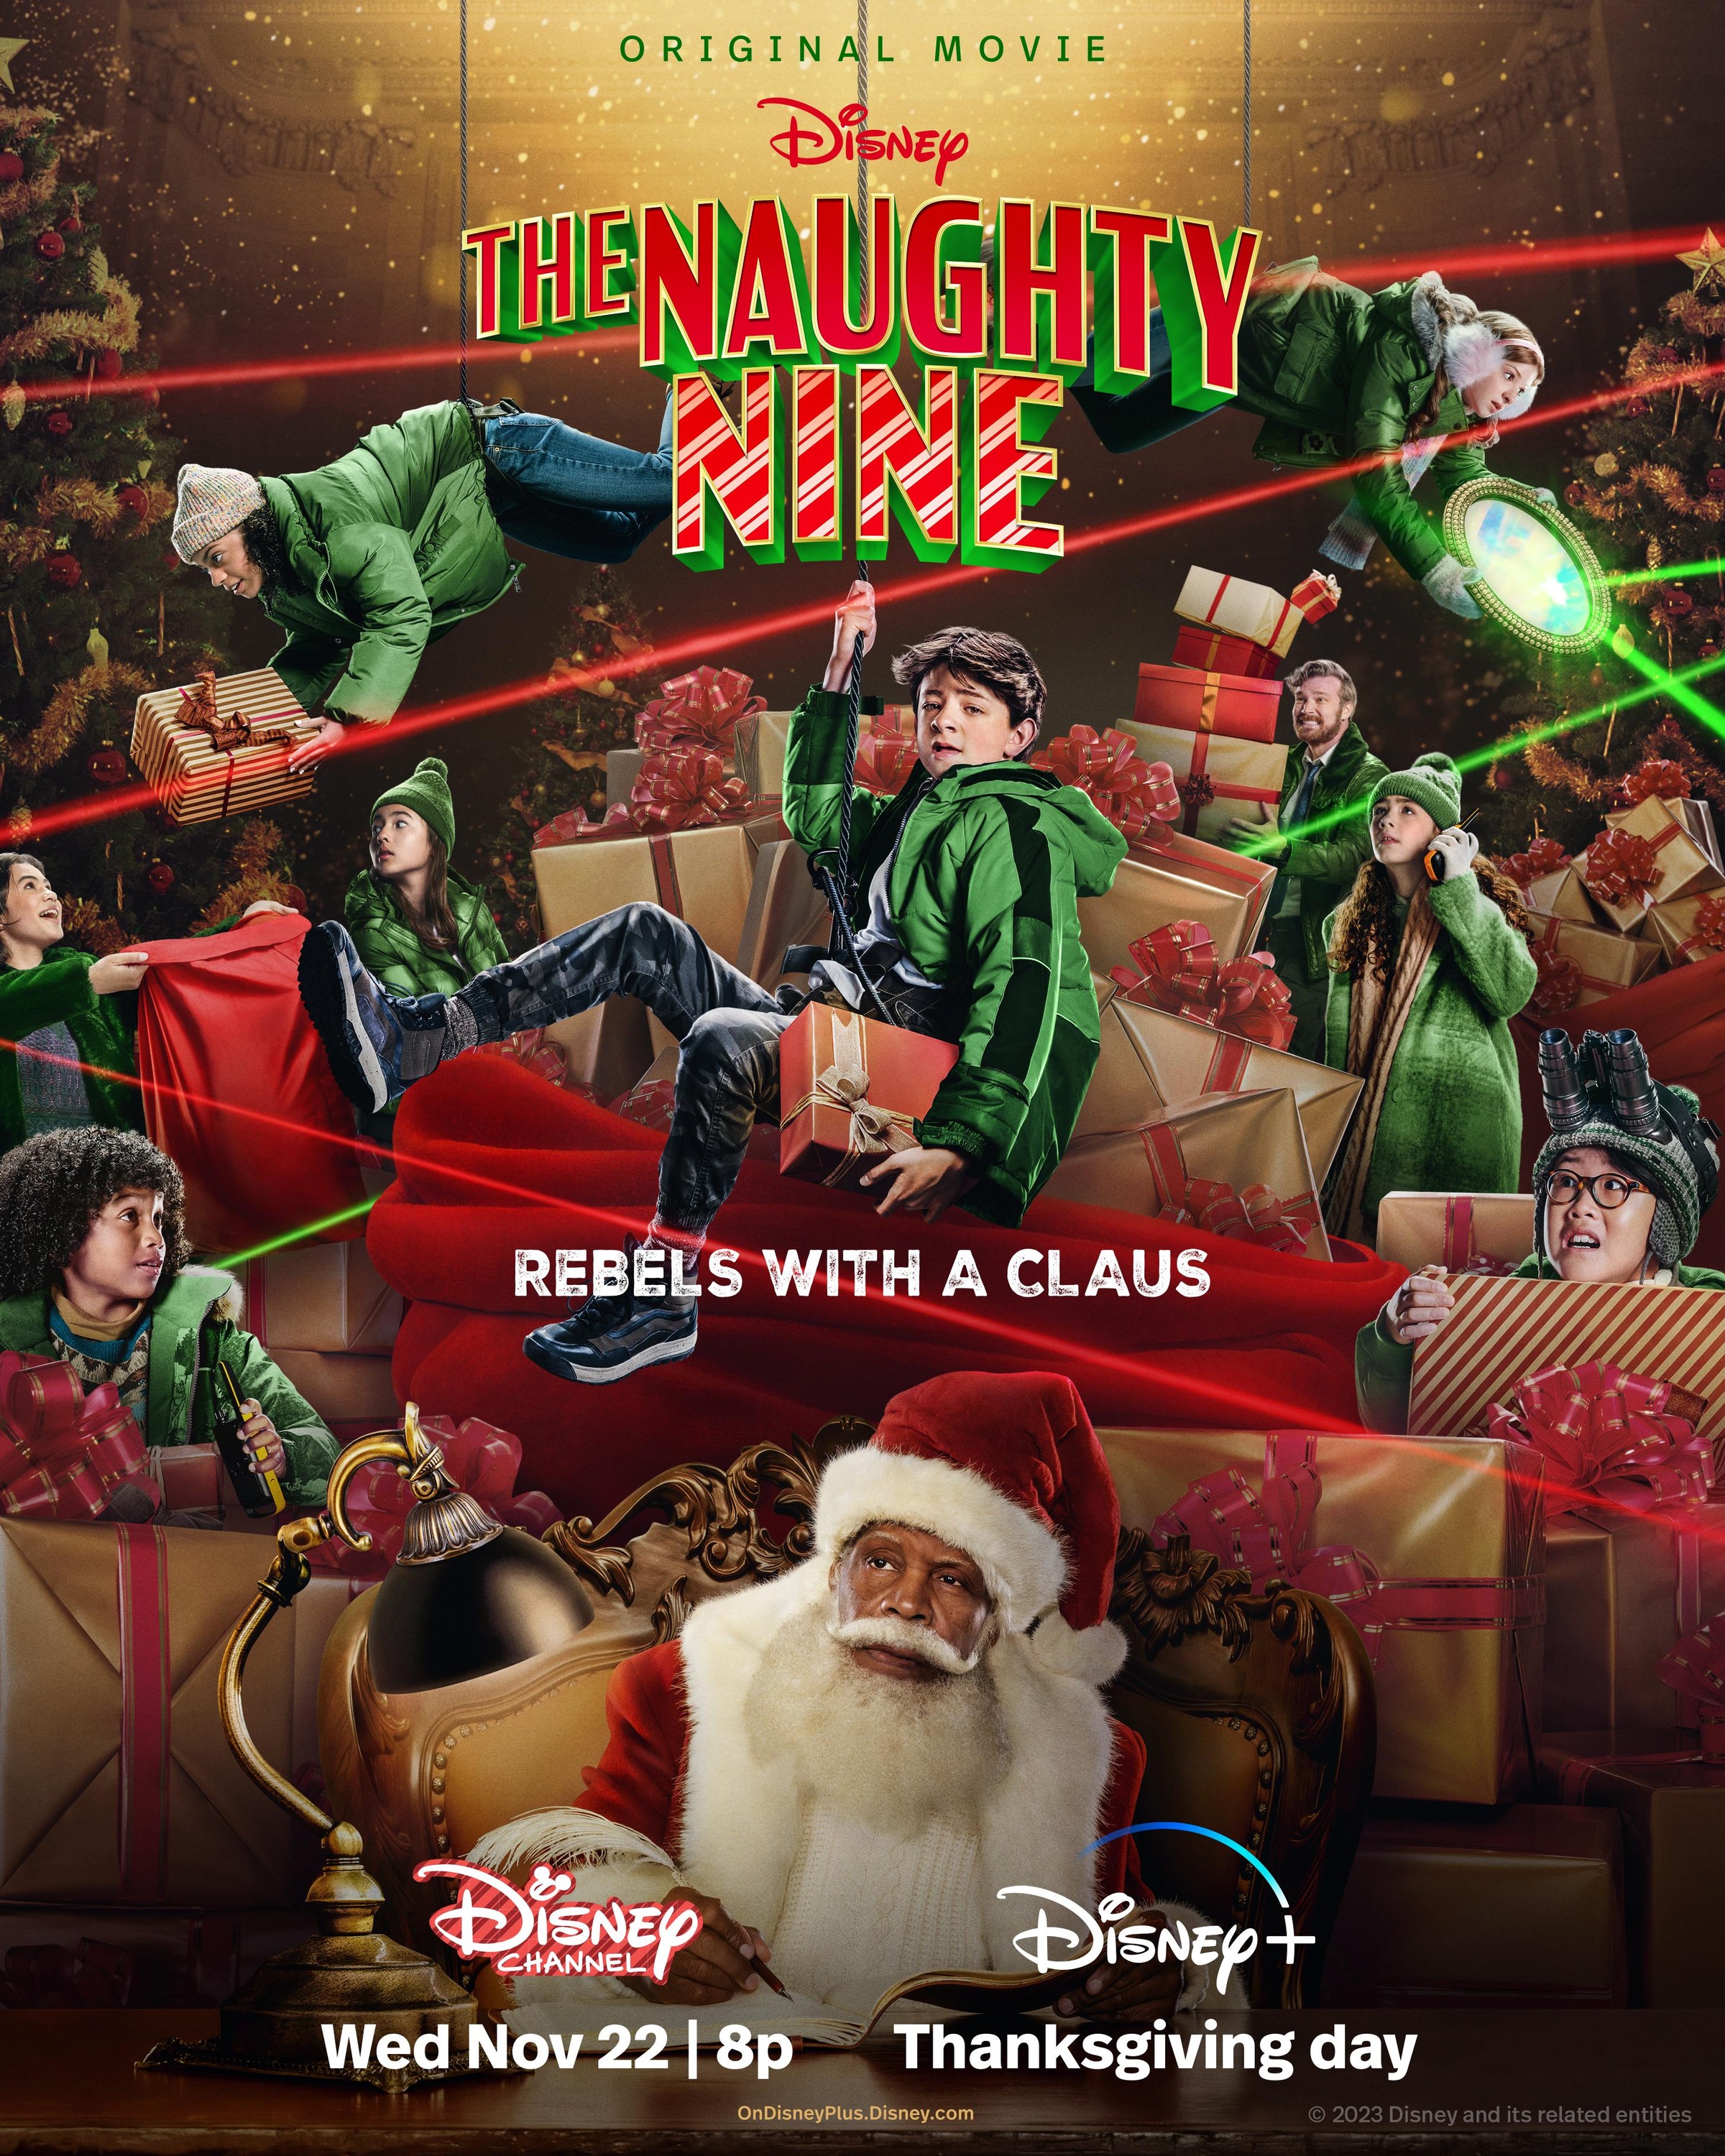 Mega Sized Movie Poster Image for The Naughty Nine 